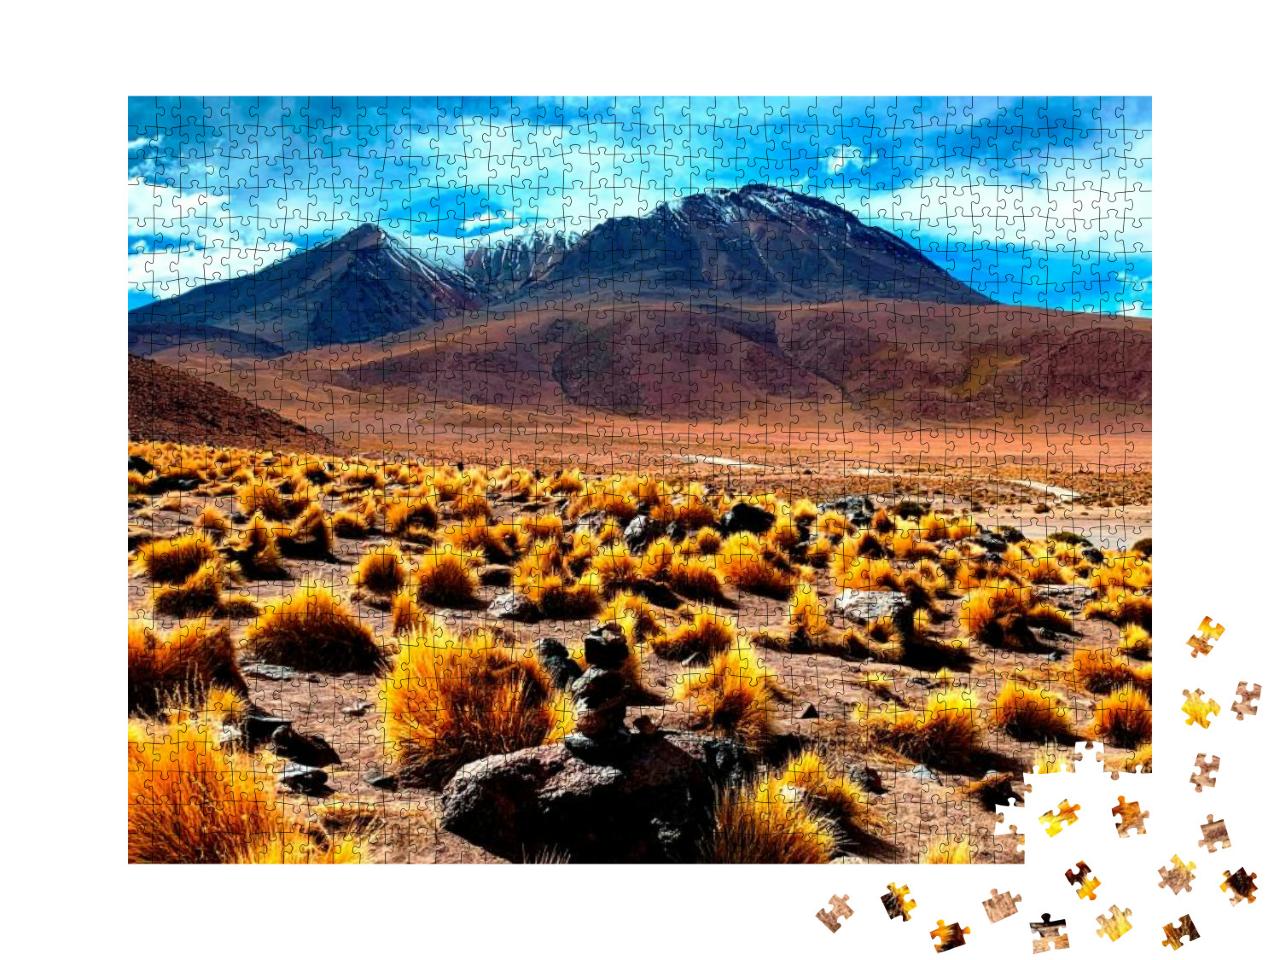 Scenic Wild Puna in Bolivia Highlands, Altiplano Plateau... Jigsaw Puzzle with 1000 pieces